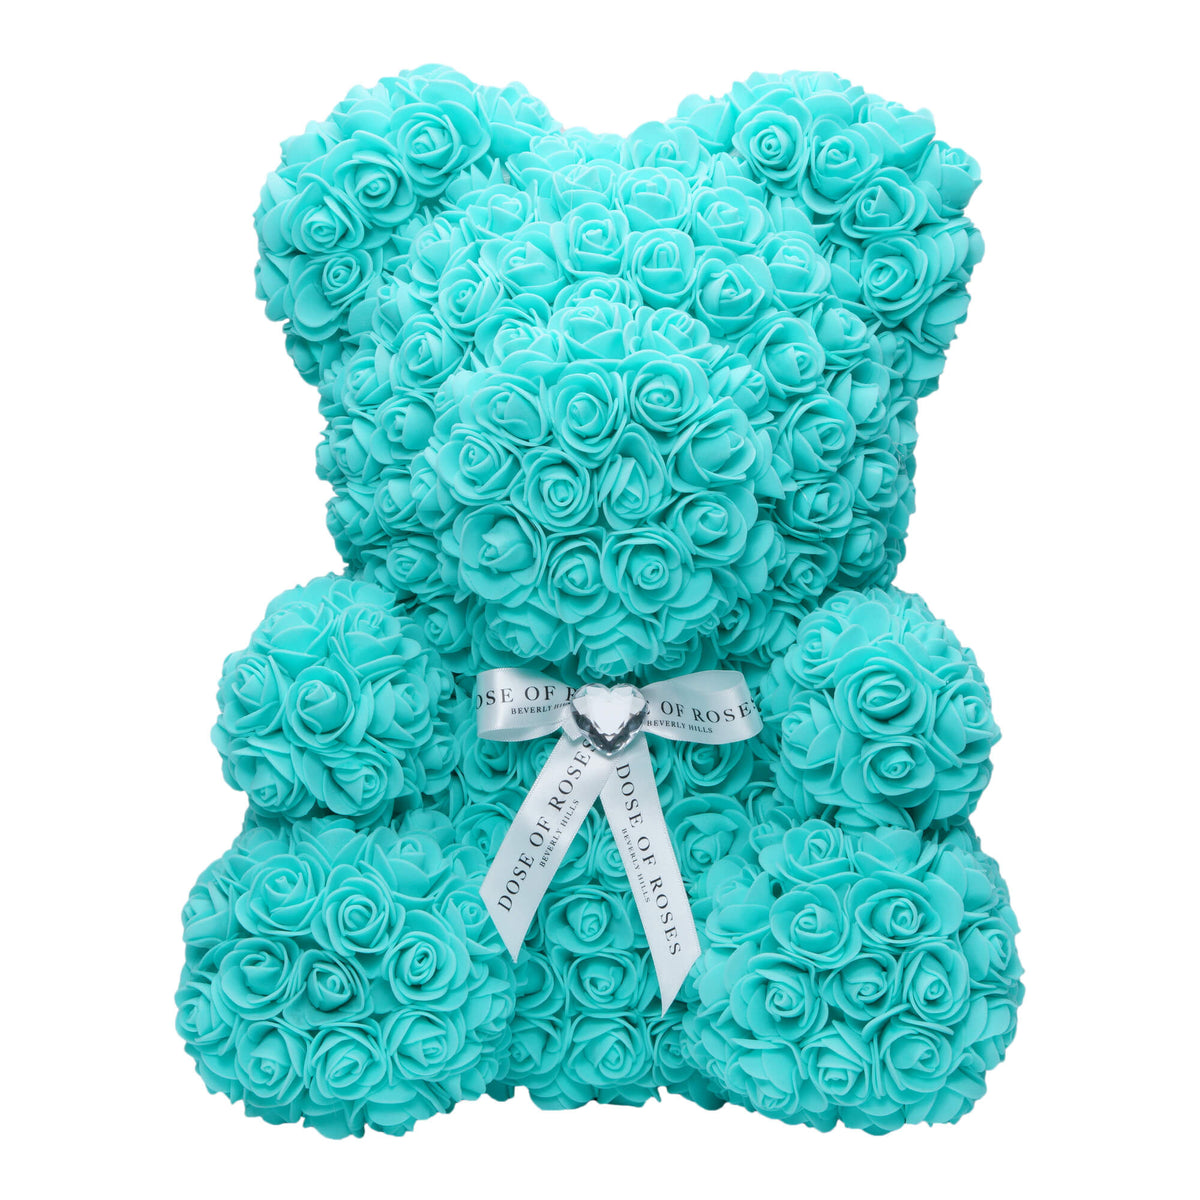 tiffany blue roses for sale